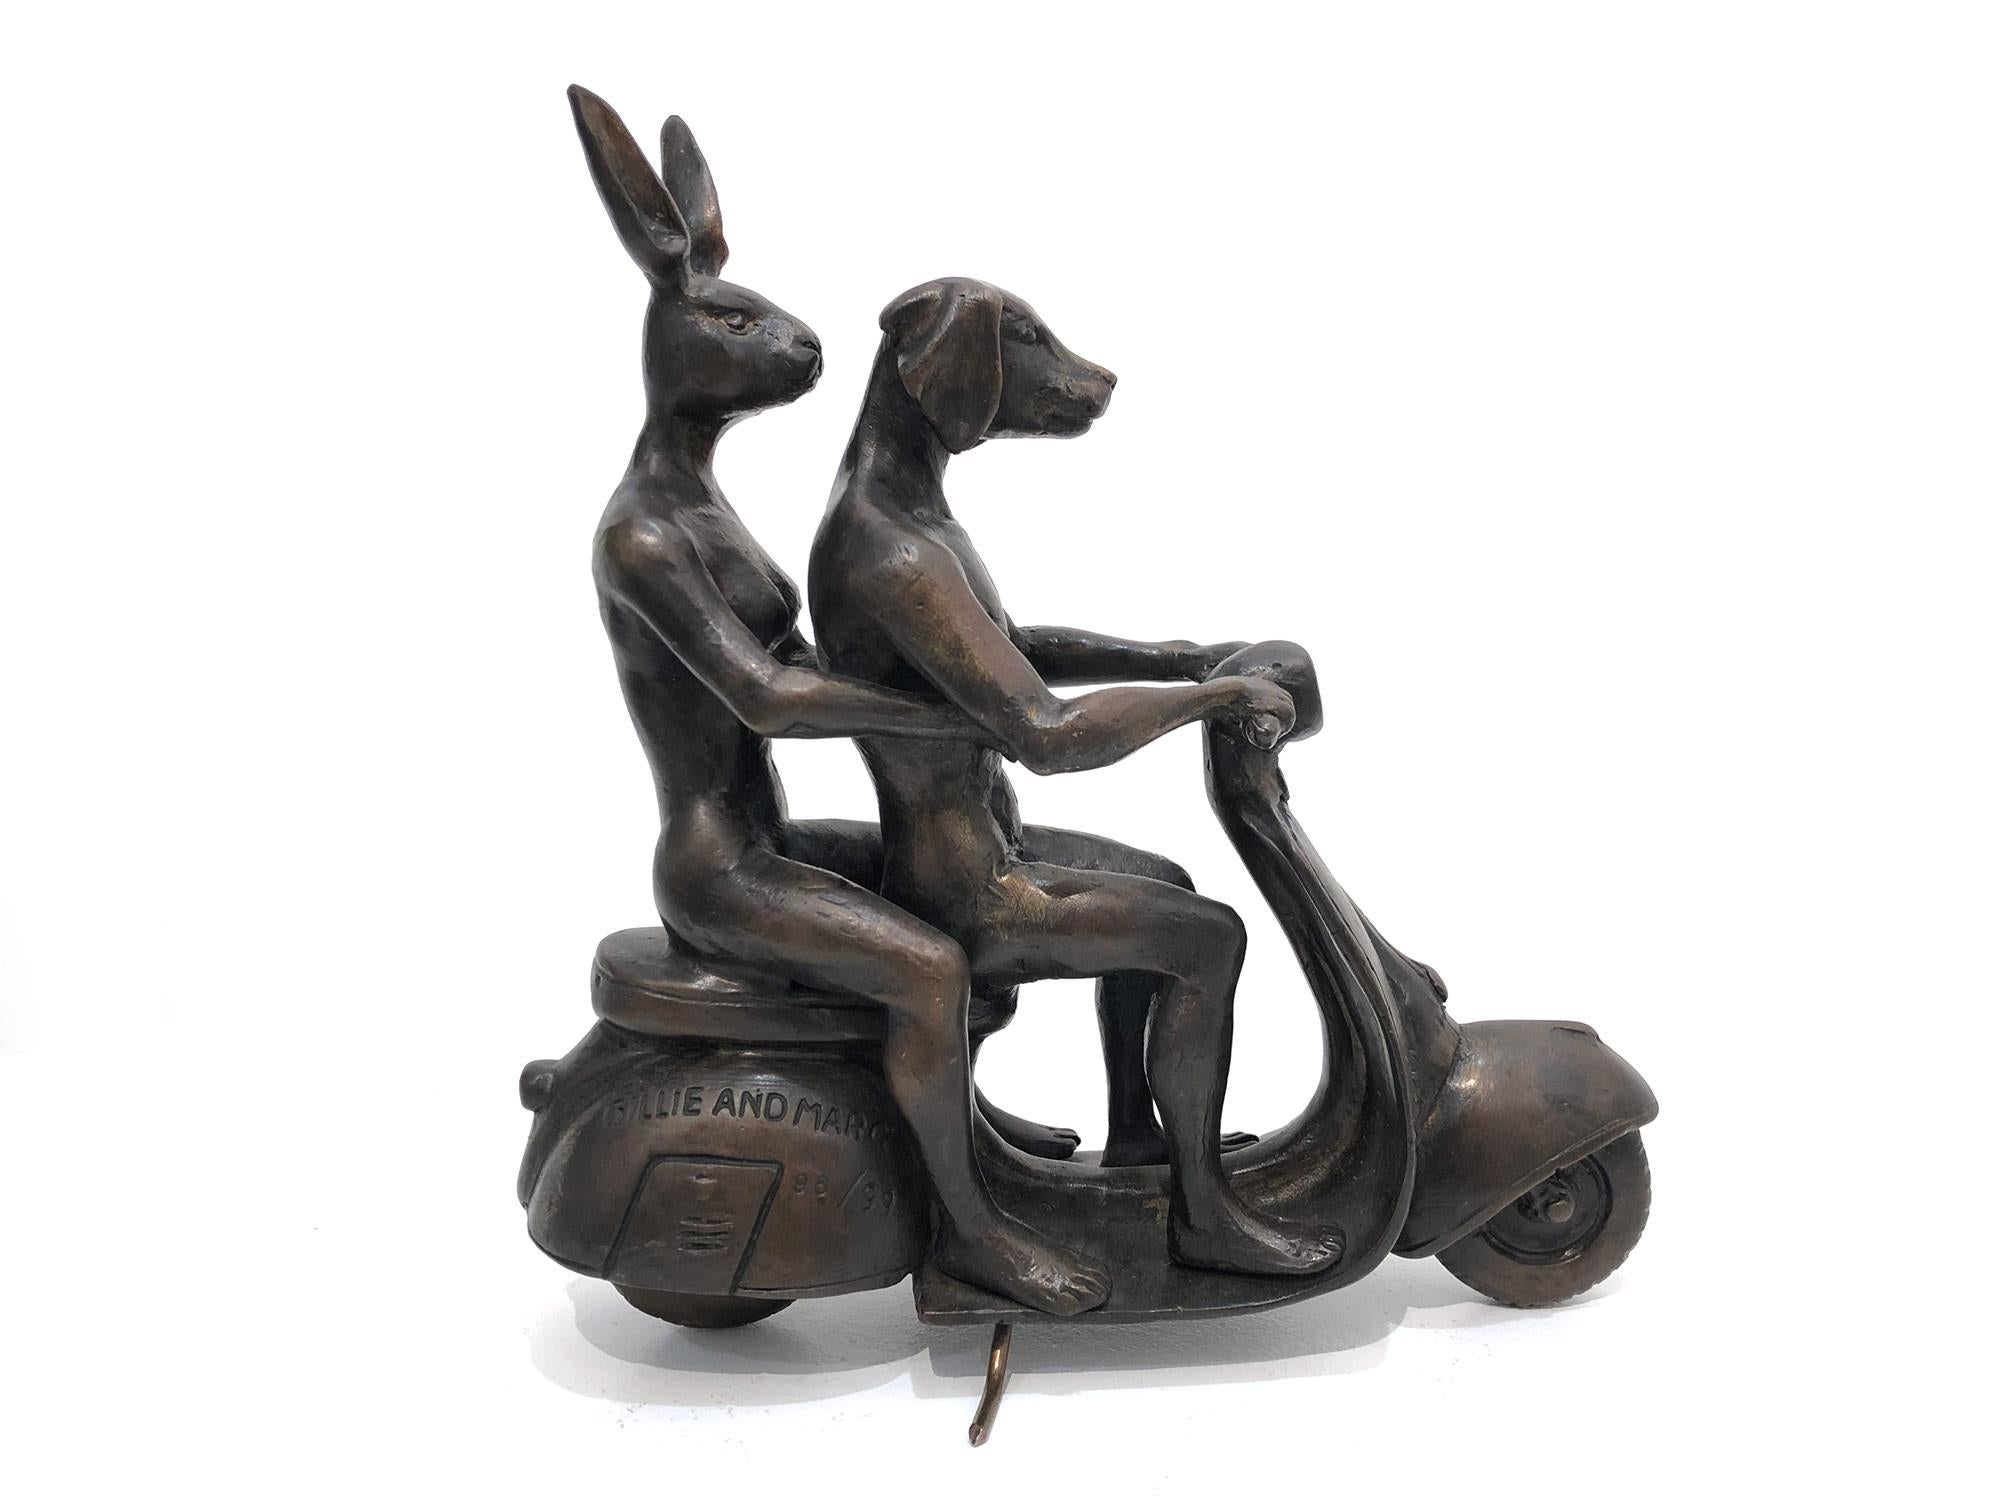 A whimsical yet very strong piece depicting the two figures from Gillie and Marc's iconic figures of the Dog/Bunny Human Hybrid, which has picked up much esteem across the globe. Here we find the figures riding on a Vespa as they embrace. This piece